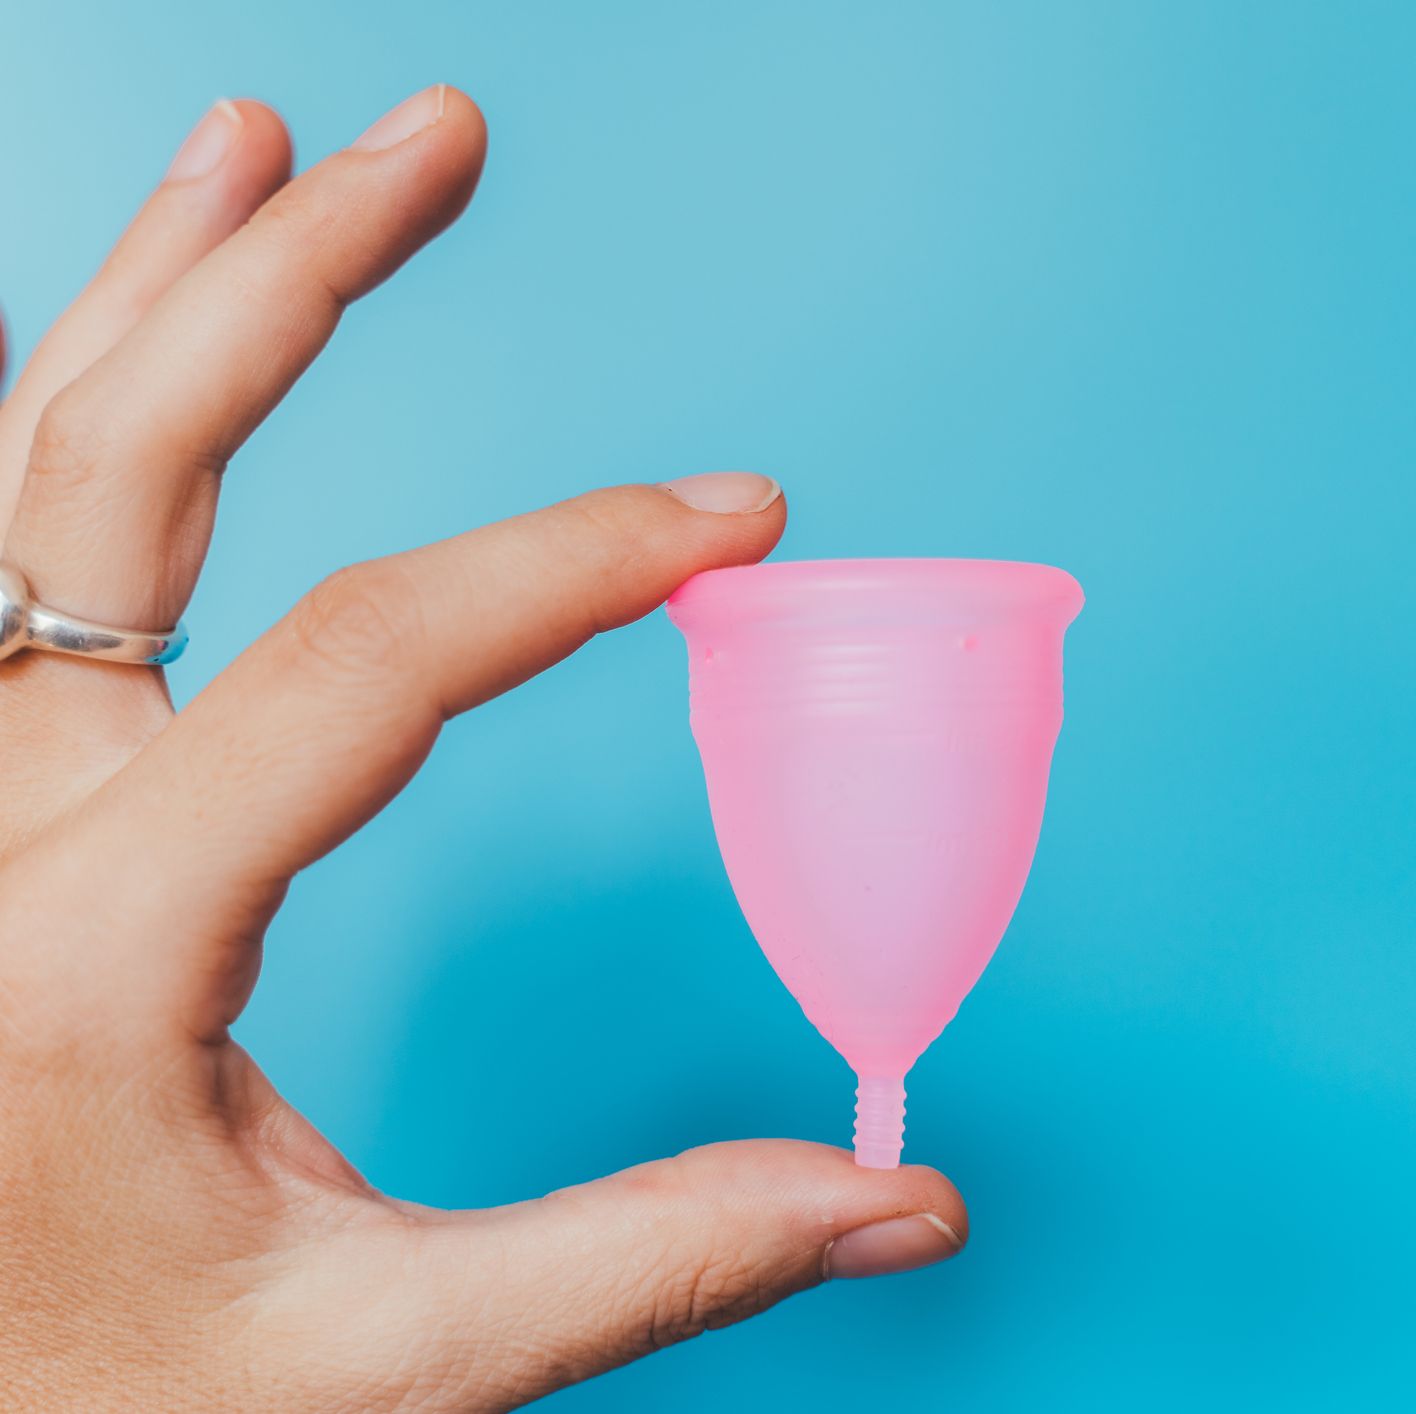 https://hips.hearstapps.com/hmg-prod/images/menstrual-cup-toxic-shock-syndrome-1579883691.jpg?crop=0.668xw:1.00xh;0.0680xw,0&resize=2048:*